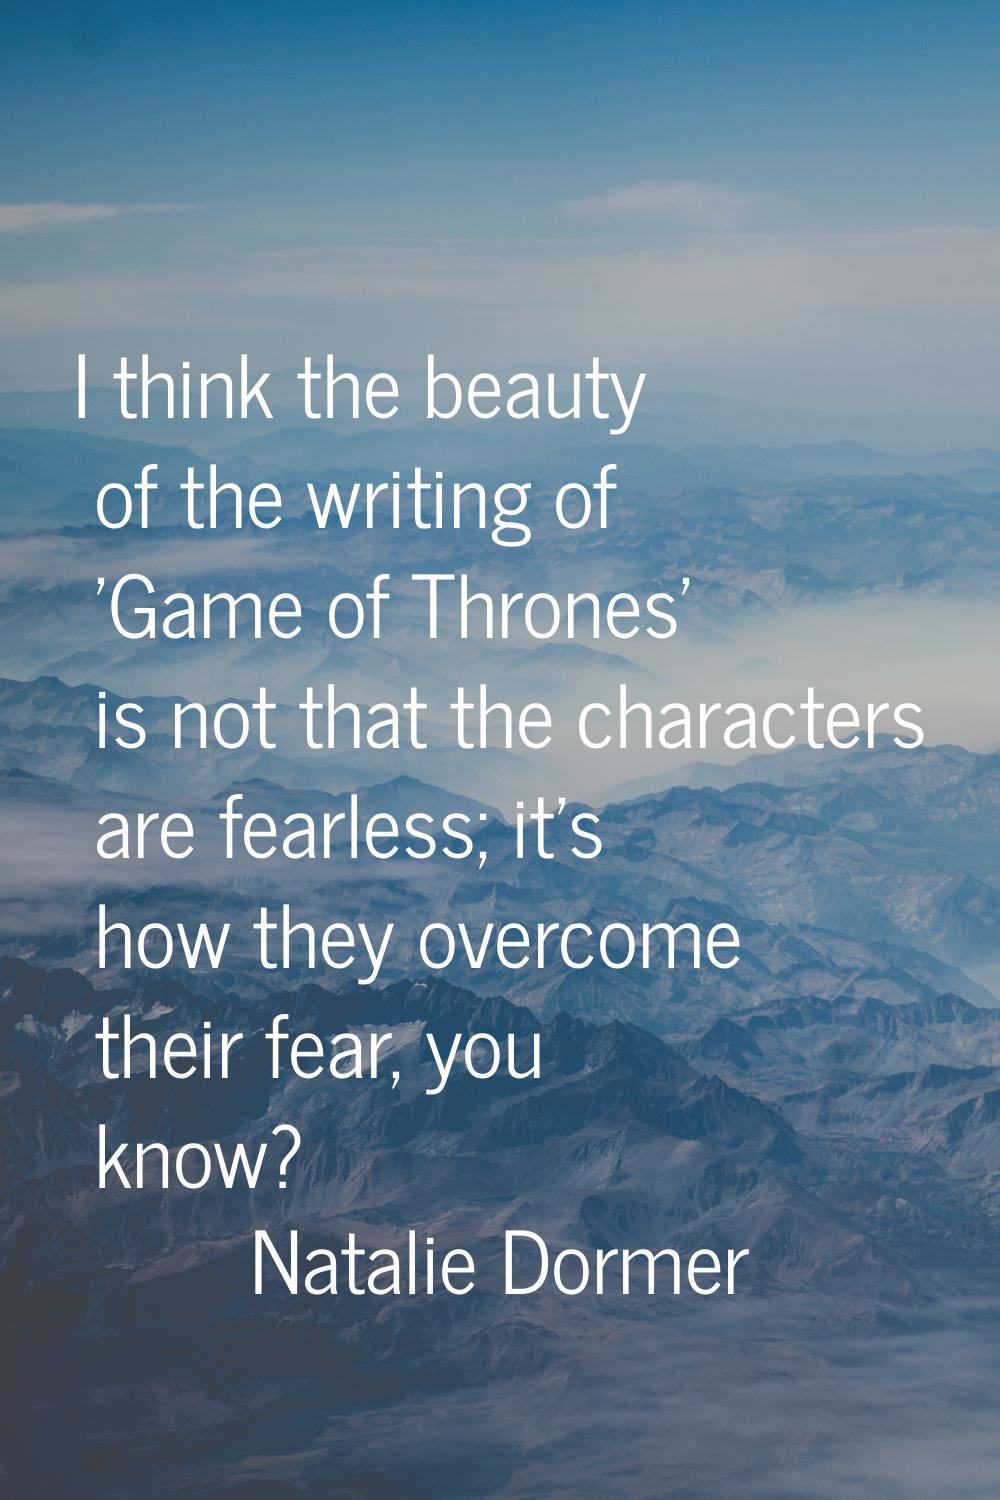 I think the beauty of the writing of 'Game of Thrones' is not that the characters are fearless; it'